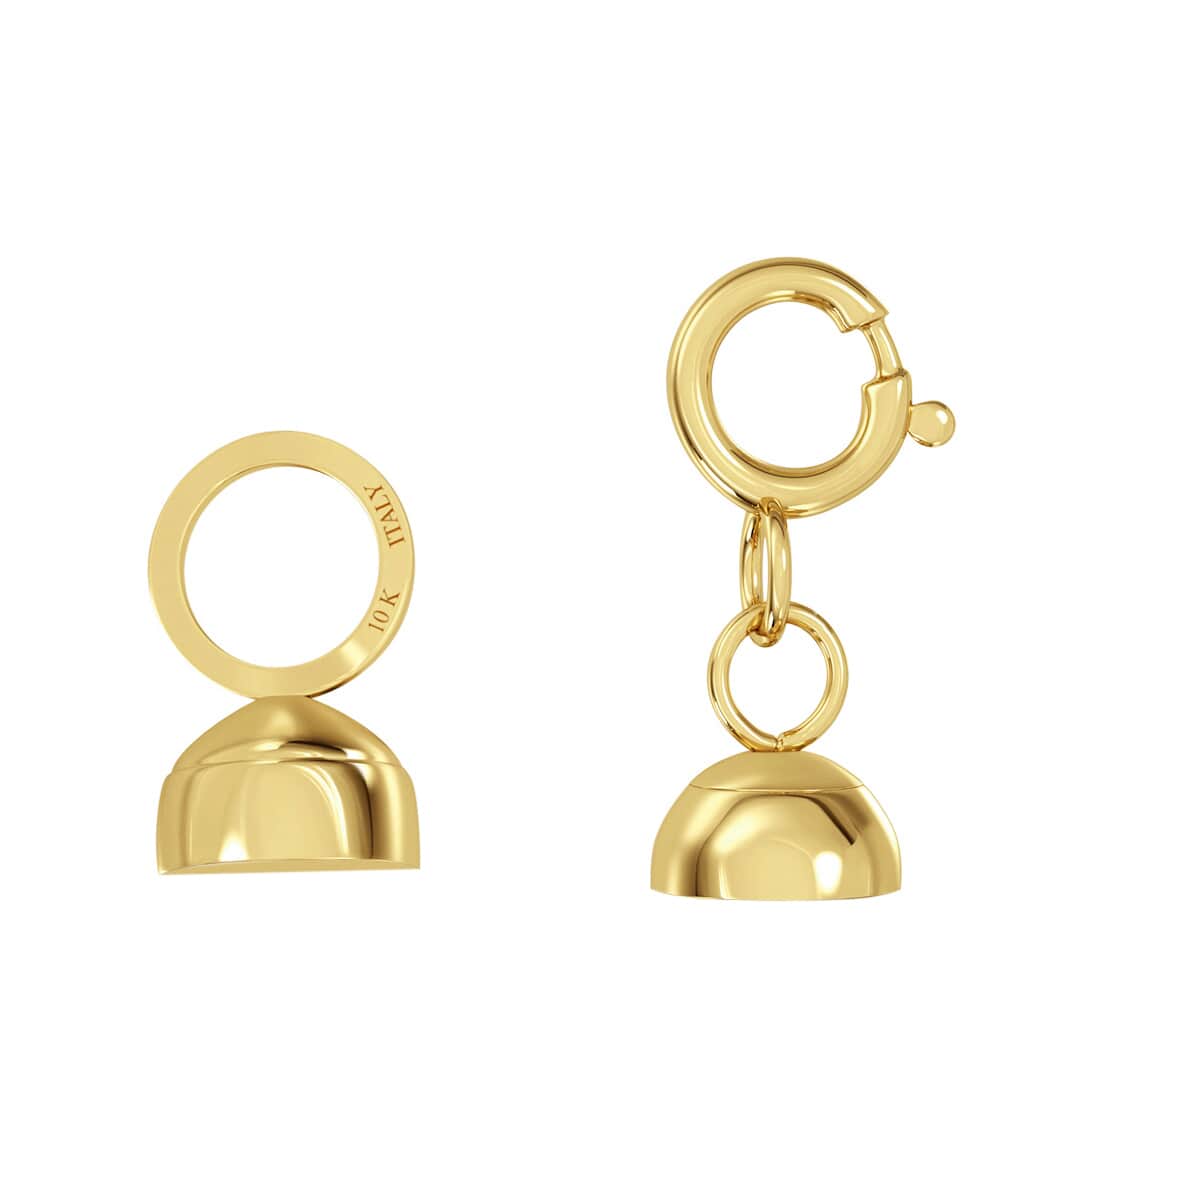 Vicenza Italian Collection Magnetic Clasp in 10K Yellow Gold 0.30 Grams 4.5 out of 5 Customer Rating image number 1